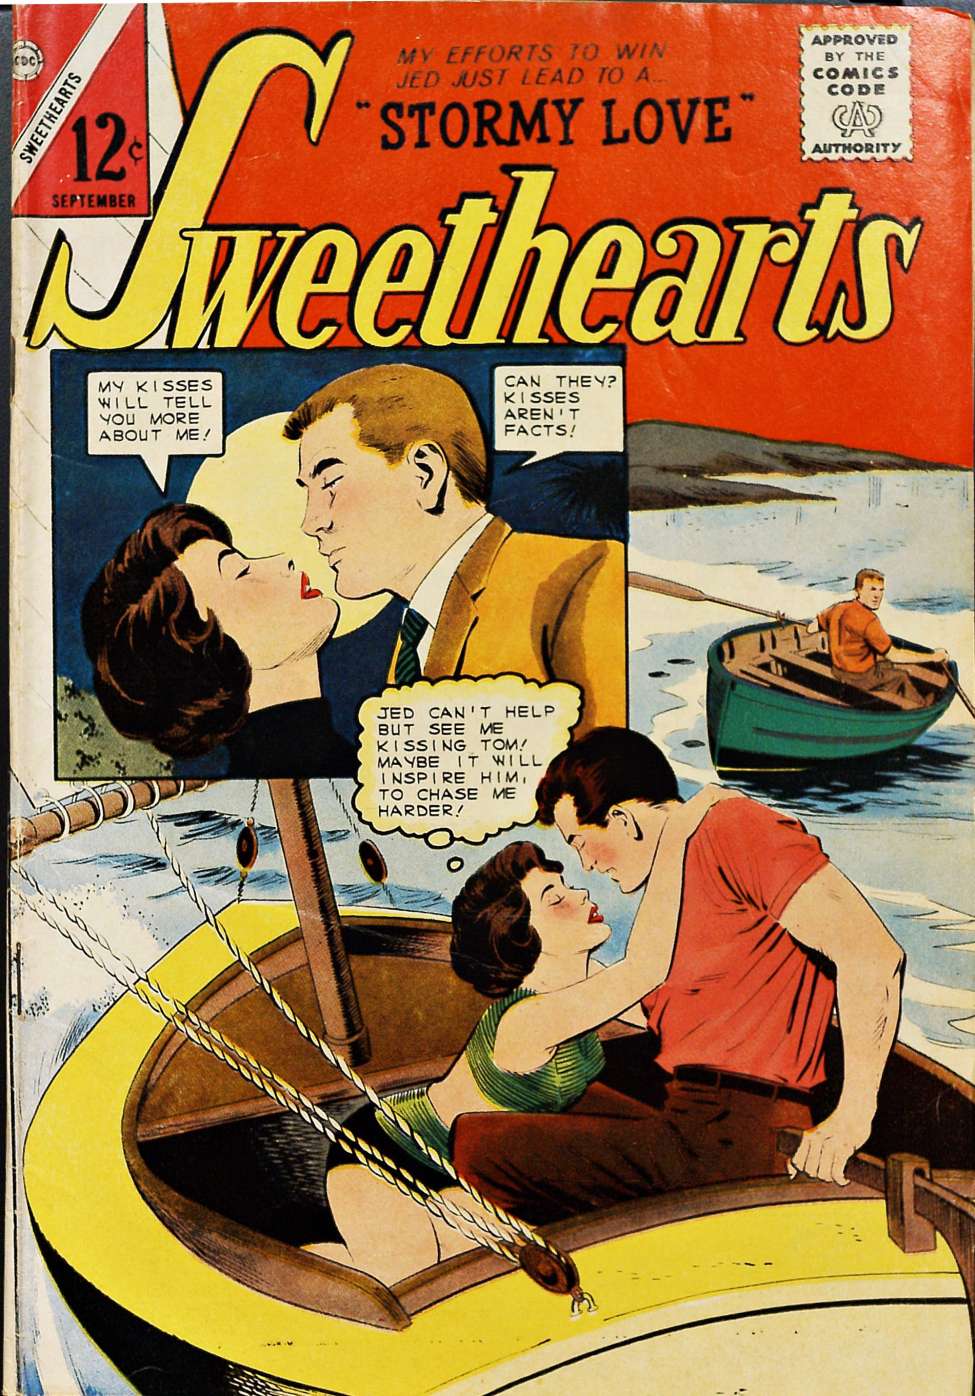 Comic Book Cover For Sweethearts 78